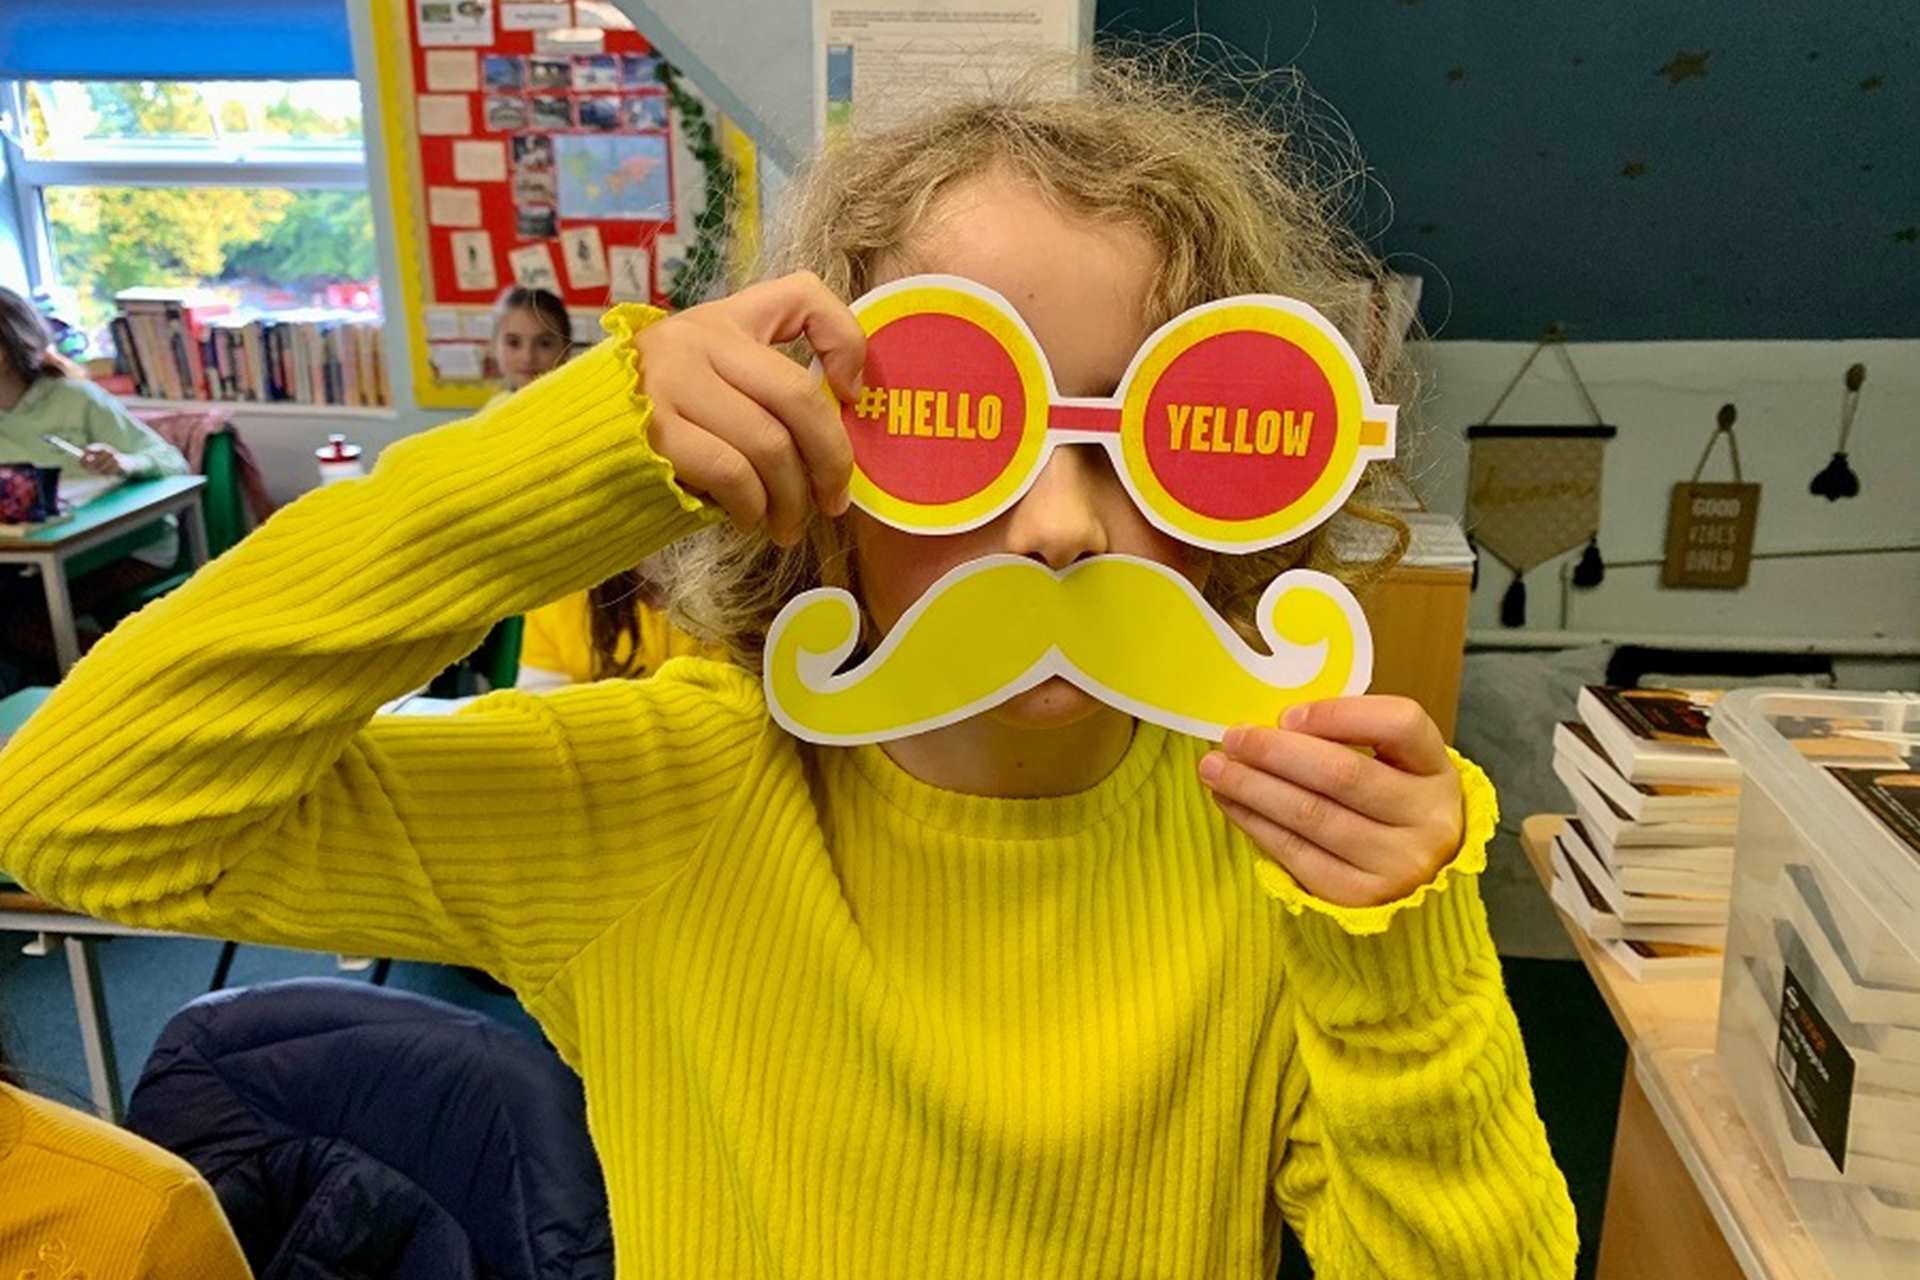 A young person stands holding glasses that have helloyellow written across them and a yellow moustache. The young person is wearing a bright yellow jumper.